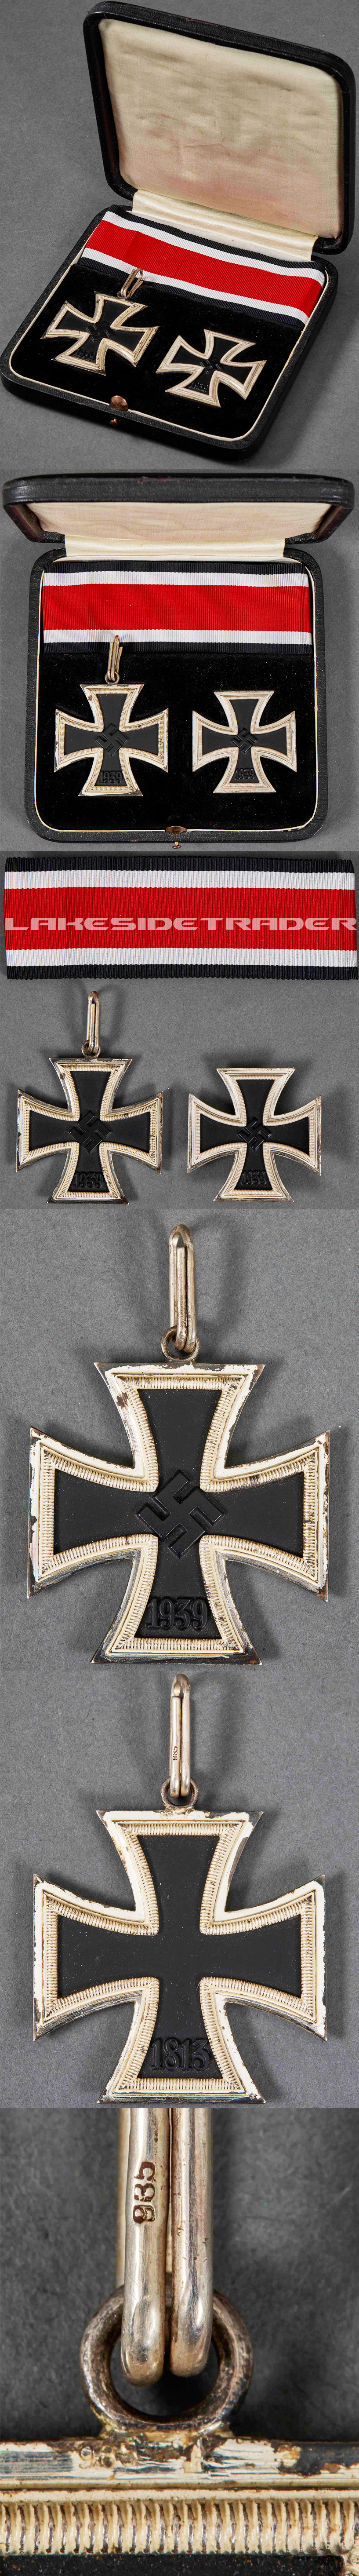 Cased Knights Cross and Iron Cross 1st Class by S&L